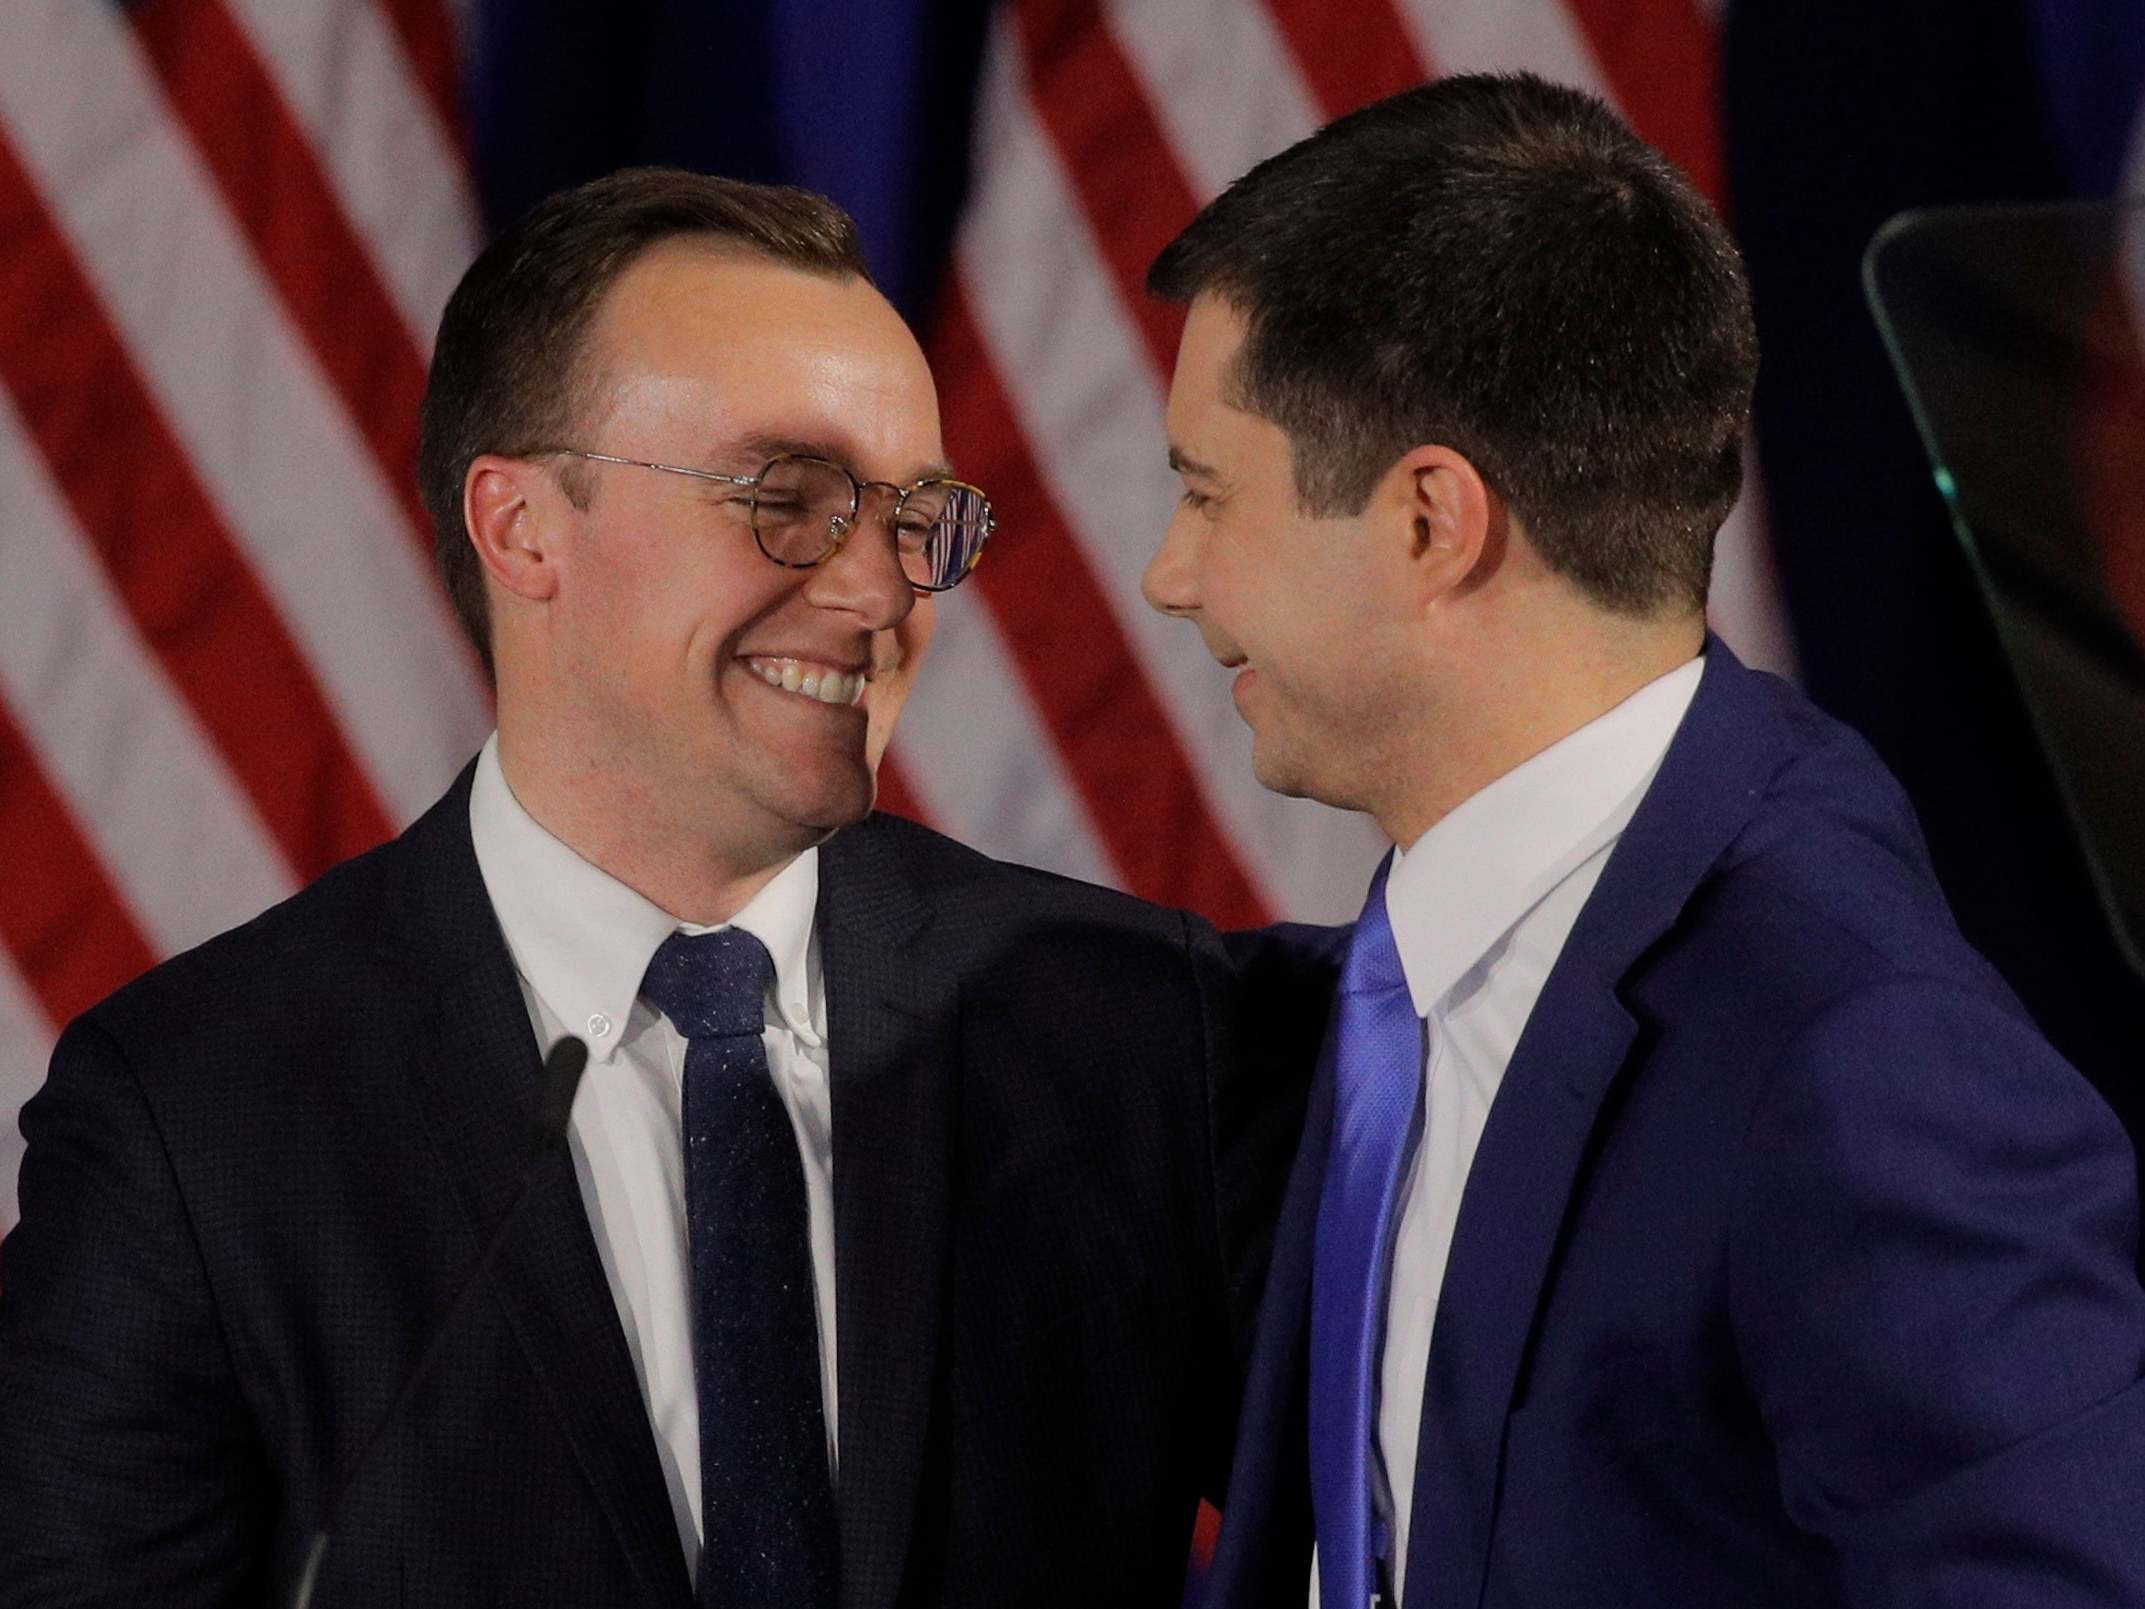 Democratic US presidential candidate and former South Bend Mayor Pete Buttigieg (right) looks at his husband Chasten at his New Hampshire primary night rally in Nashua, New Hampshire, US, 11 February, 2020.